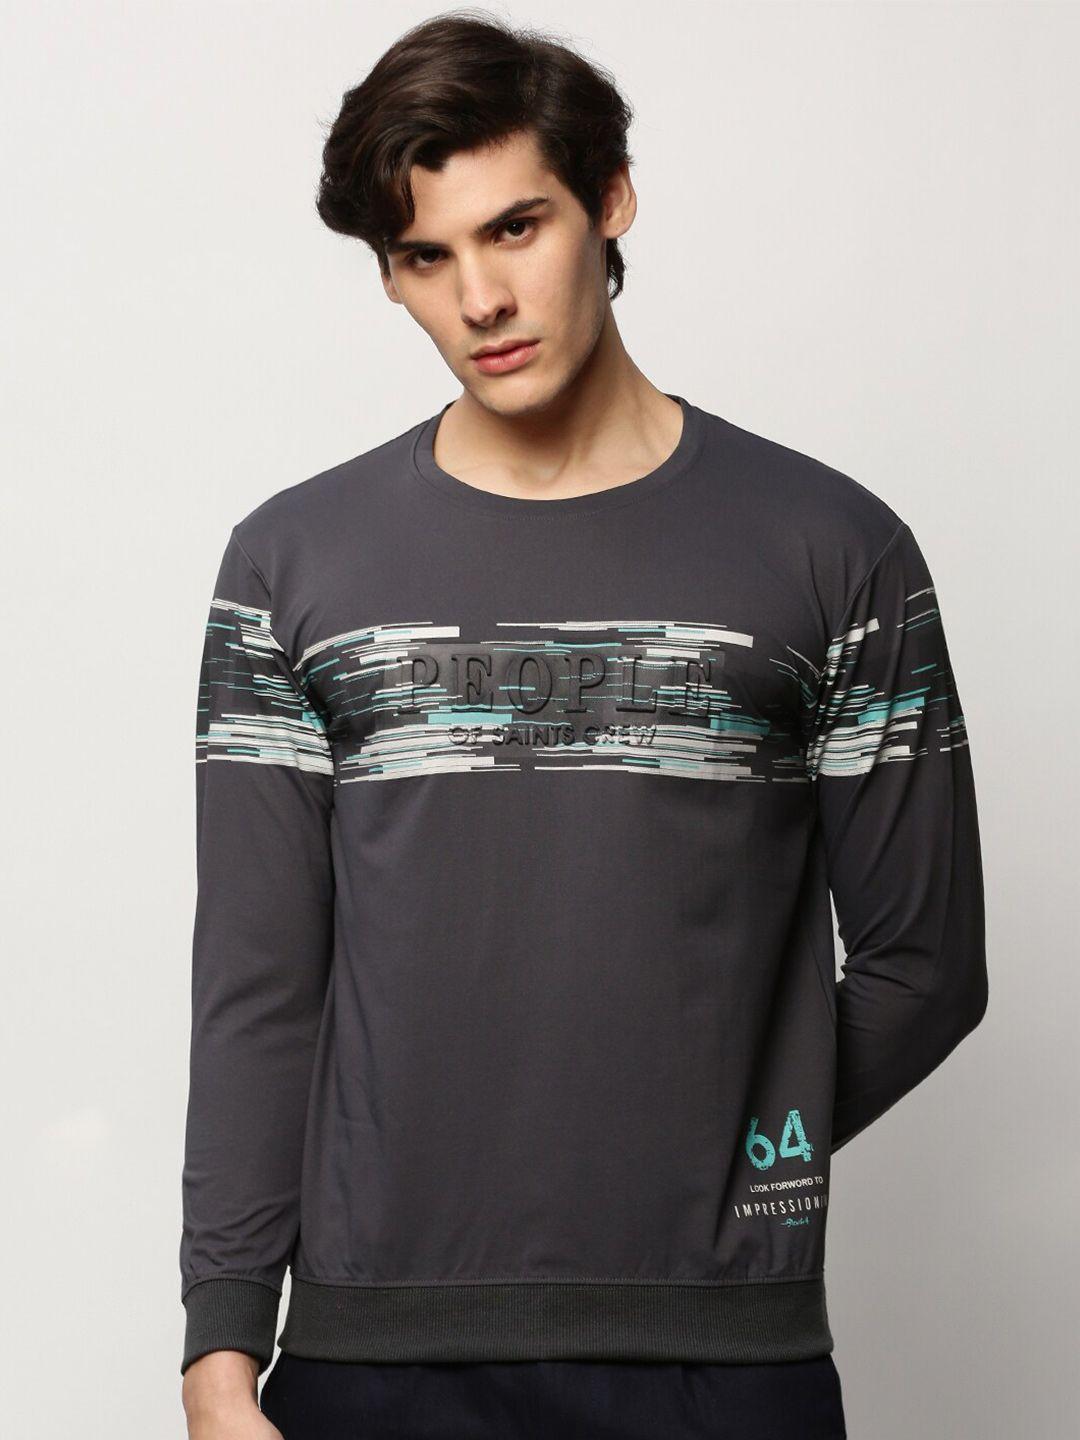 showoff graphic printed cotton pullover